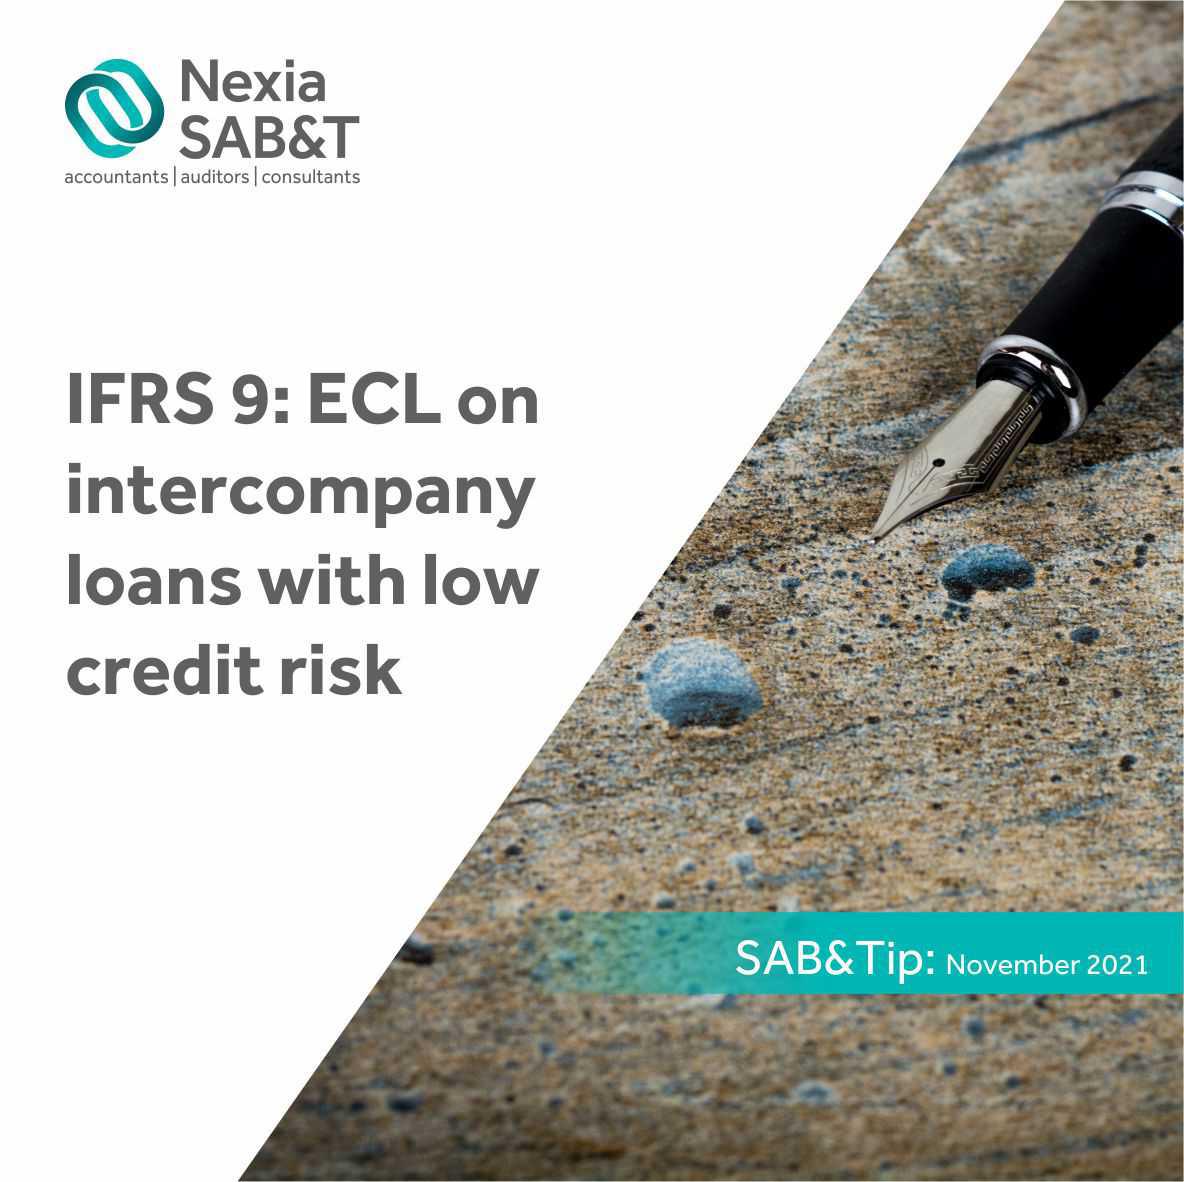 IFRS9: ECL on intercompany loans with low credit risk